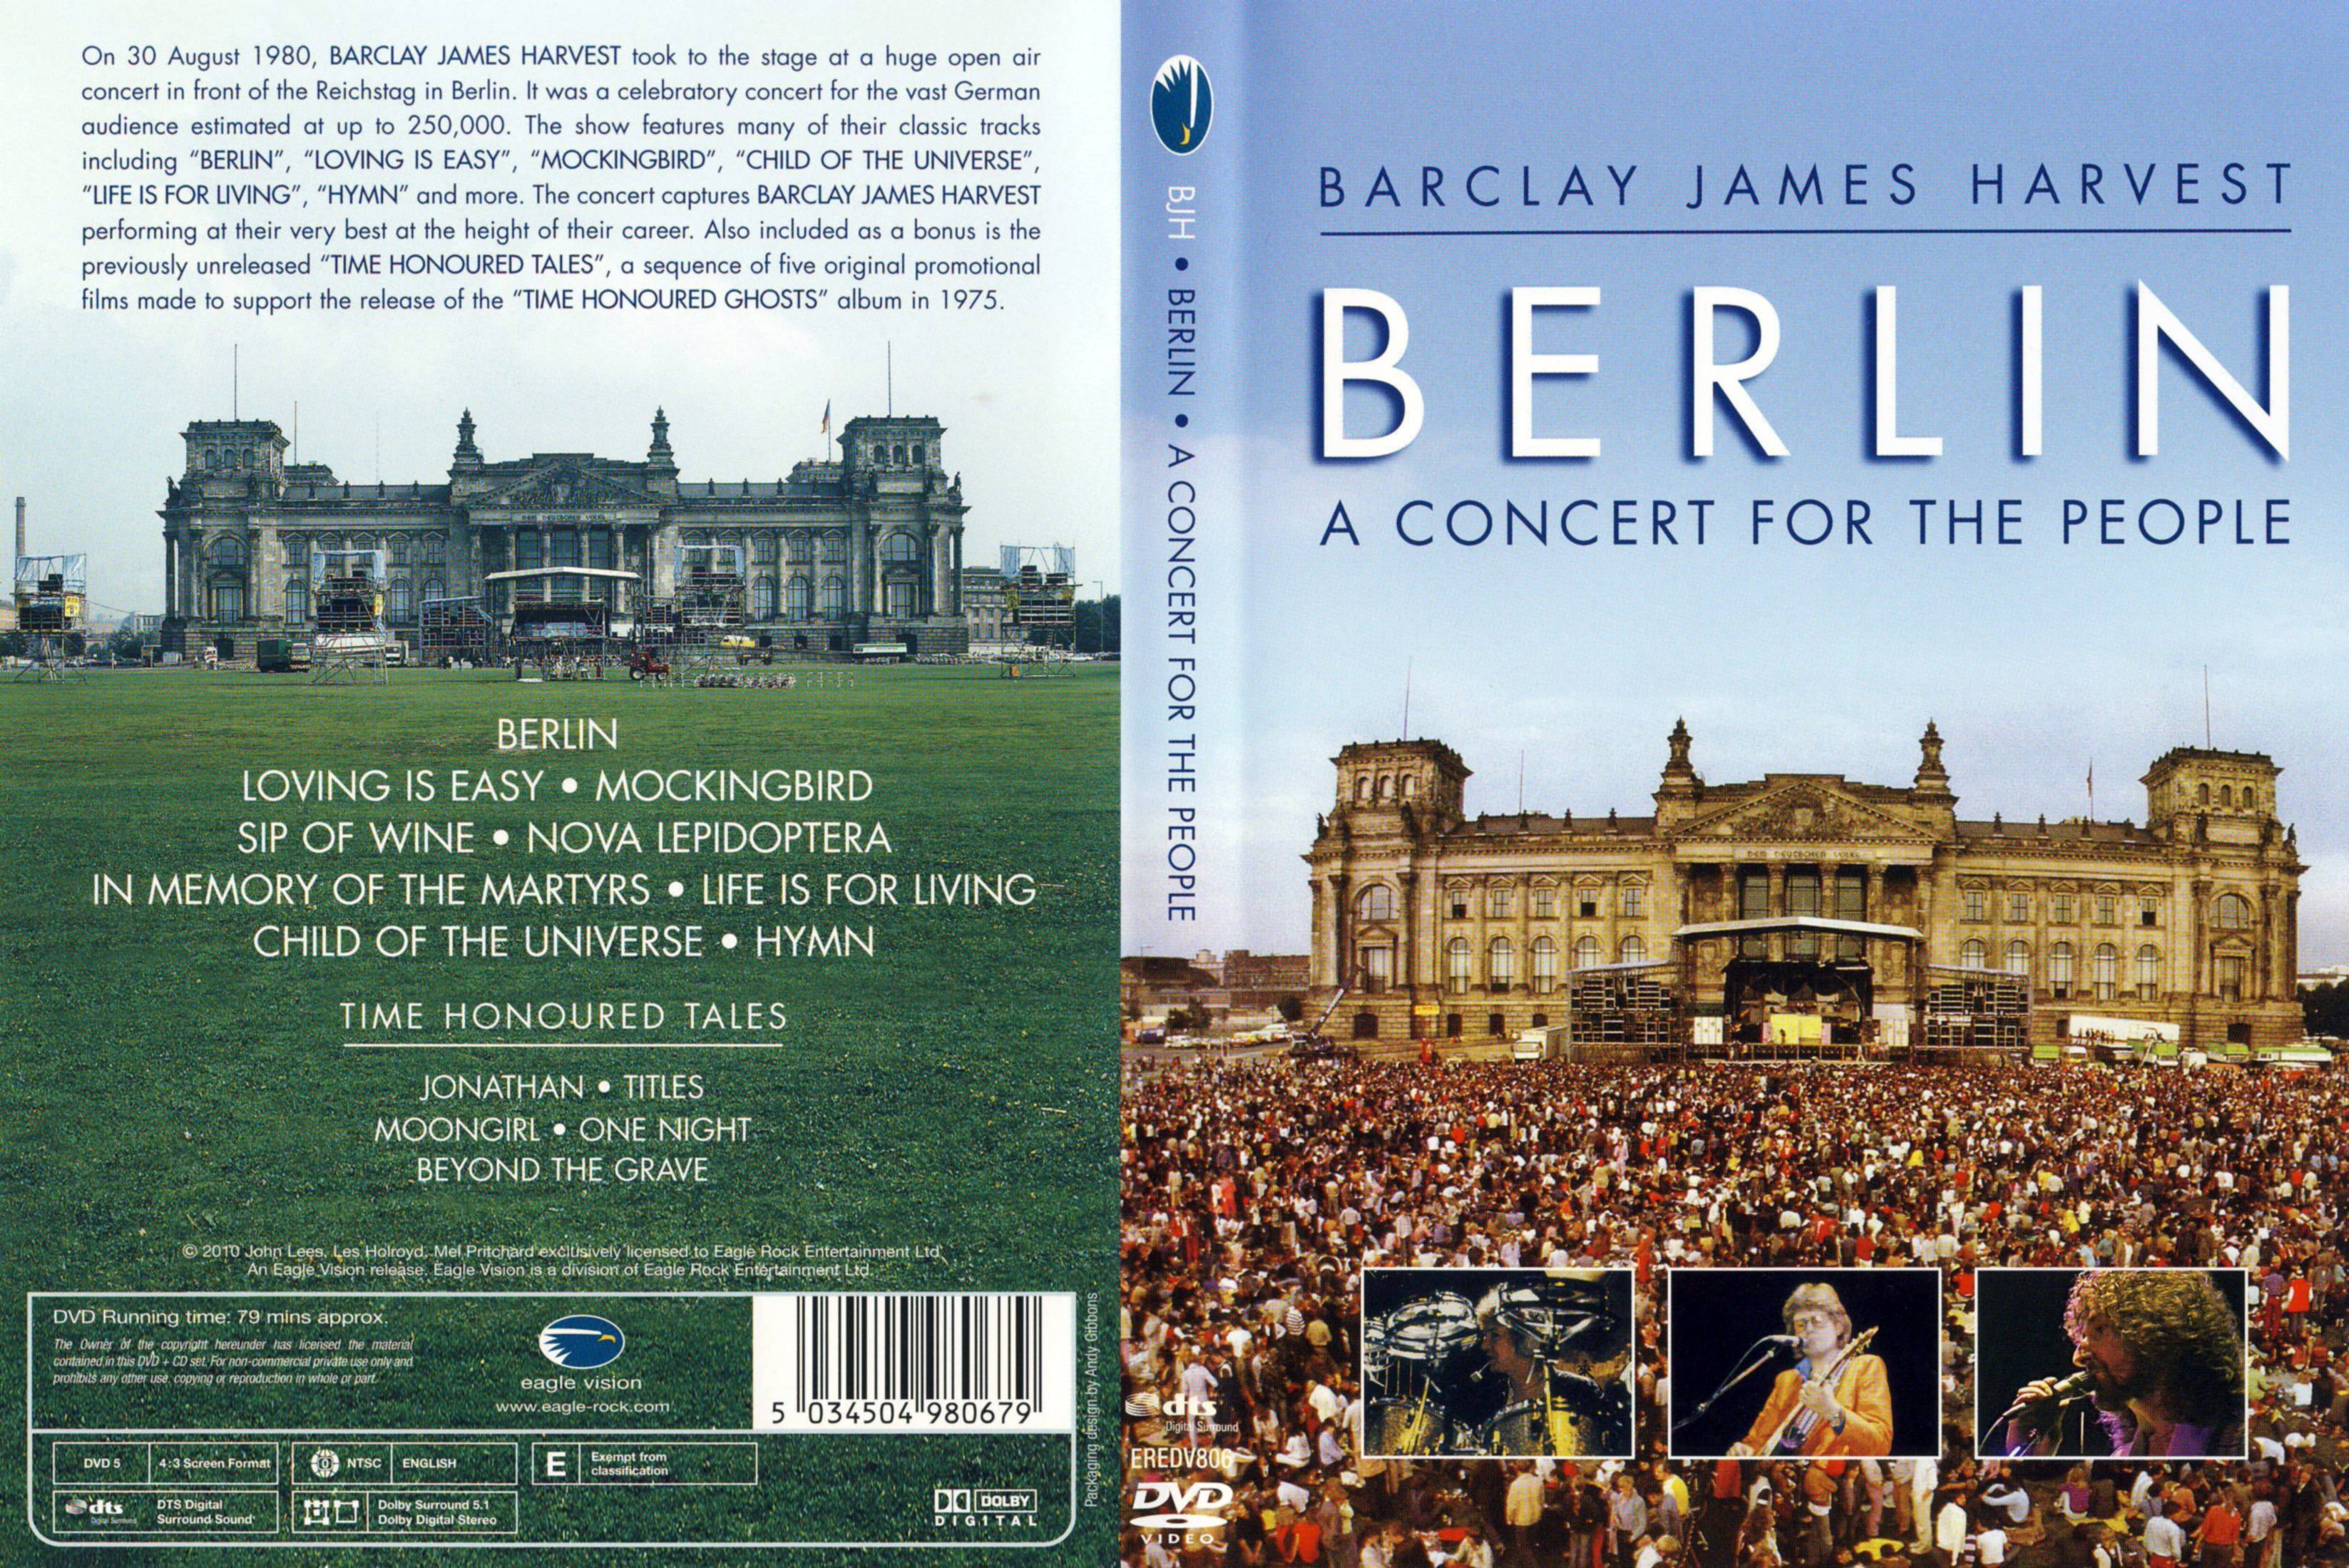 Jaquette DVD Barclay James Harvest - A concert for the people